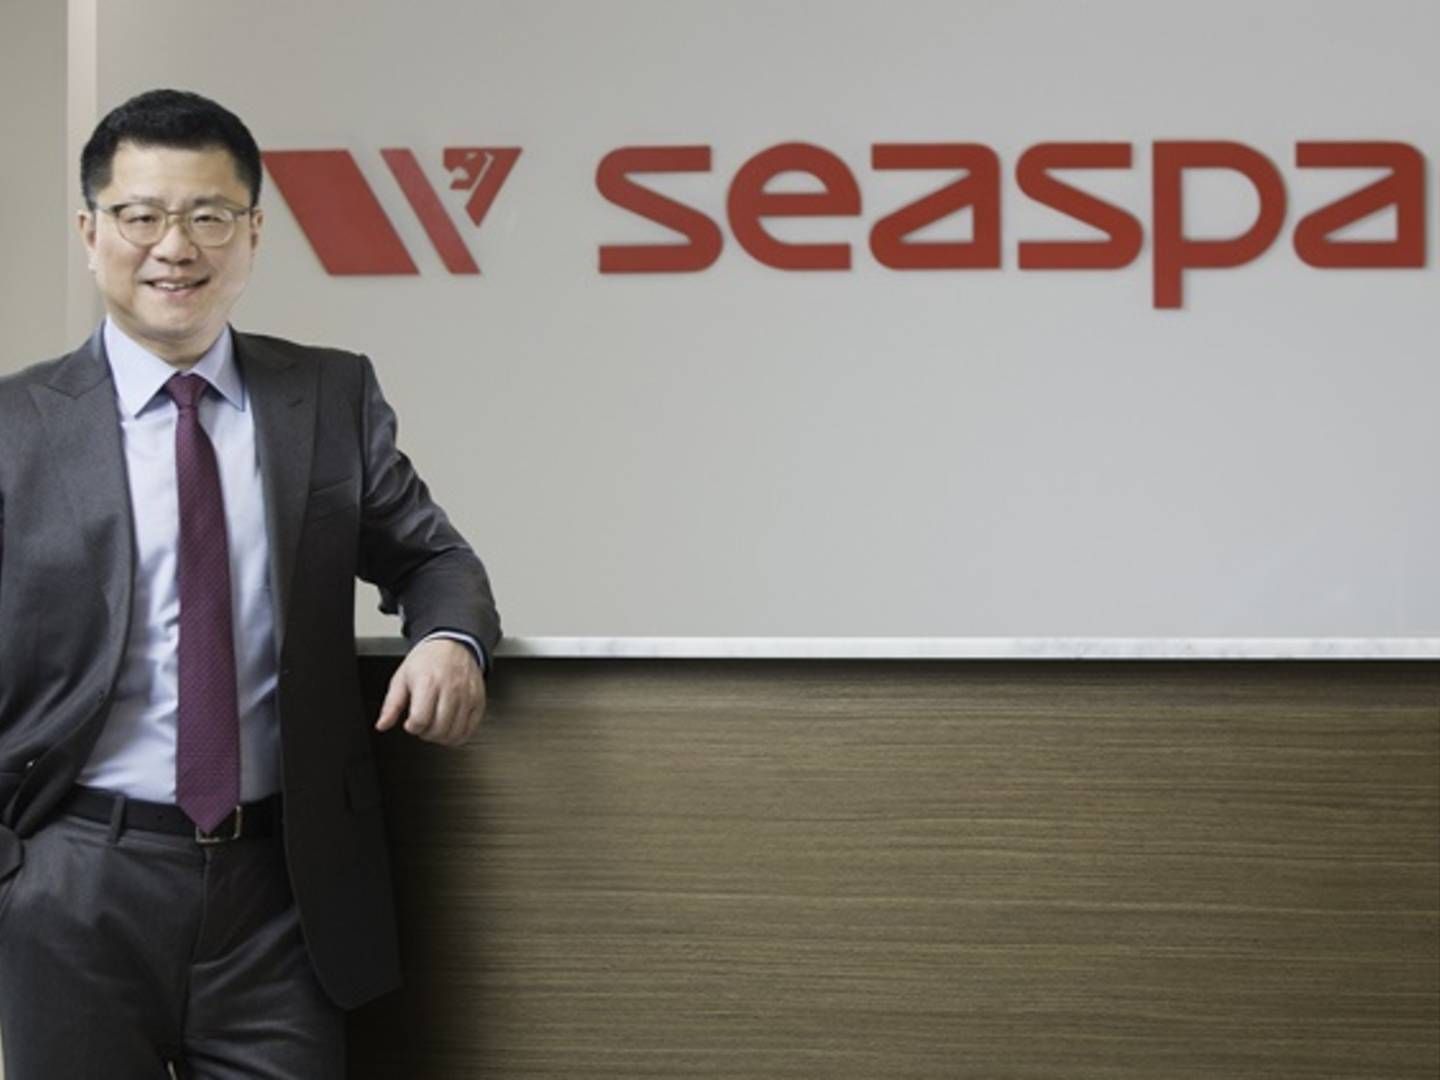 Bing Chen, President and CEO of Atlas Corp., promises another record year, primarily due to the container market upswing. | Photo: PR/Seaspan